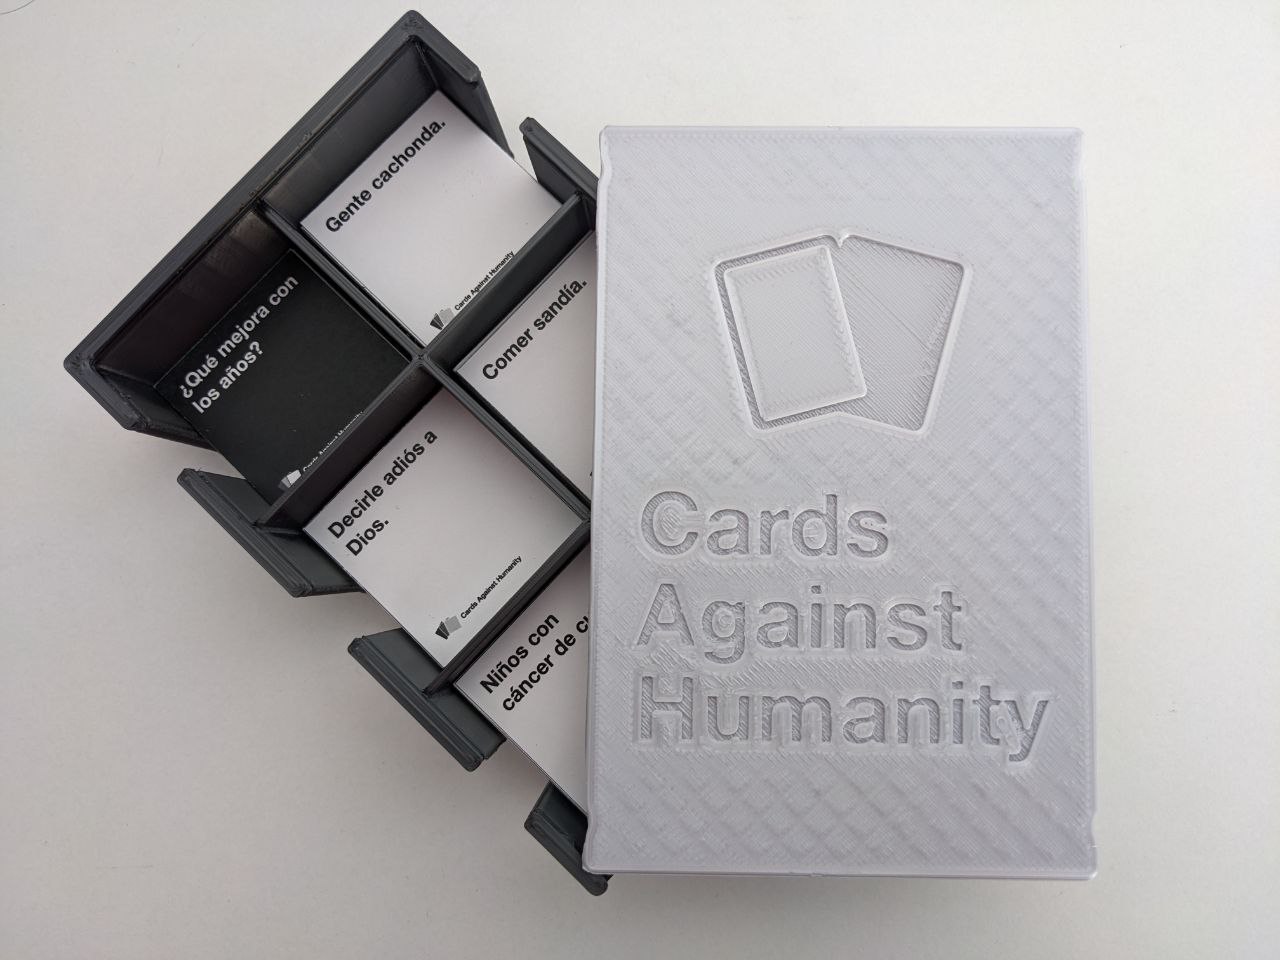 Cards Against Humanity Box (DIY edition) by JGR